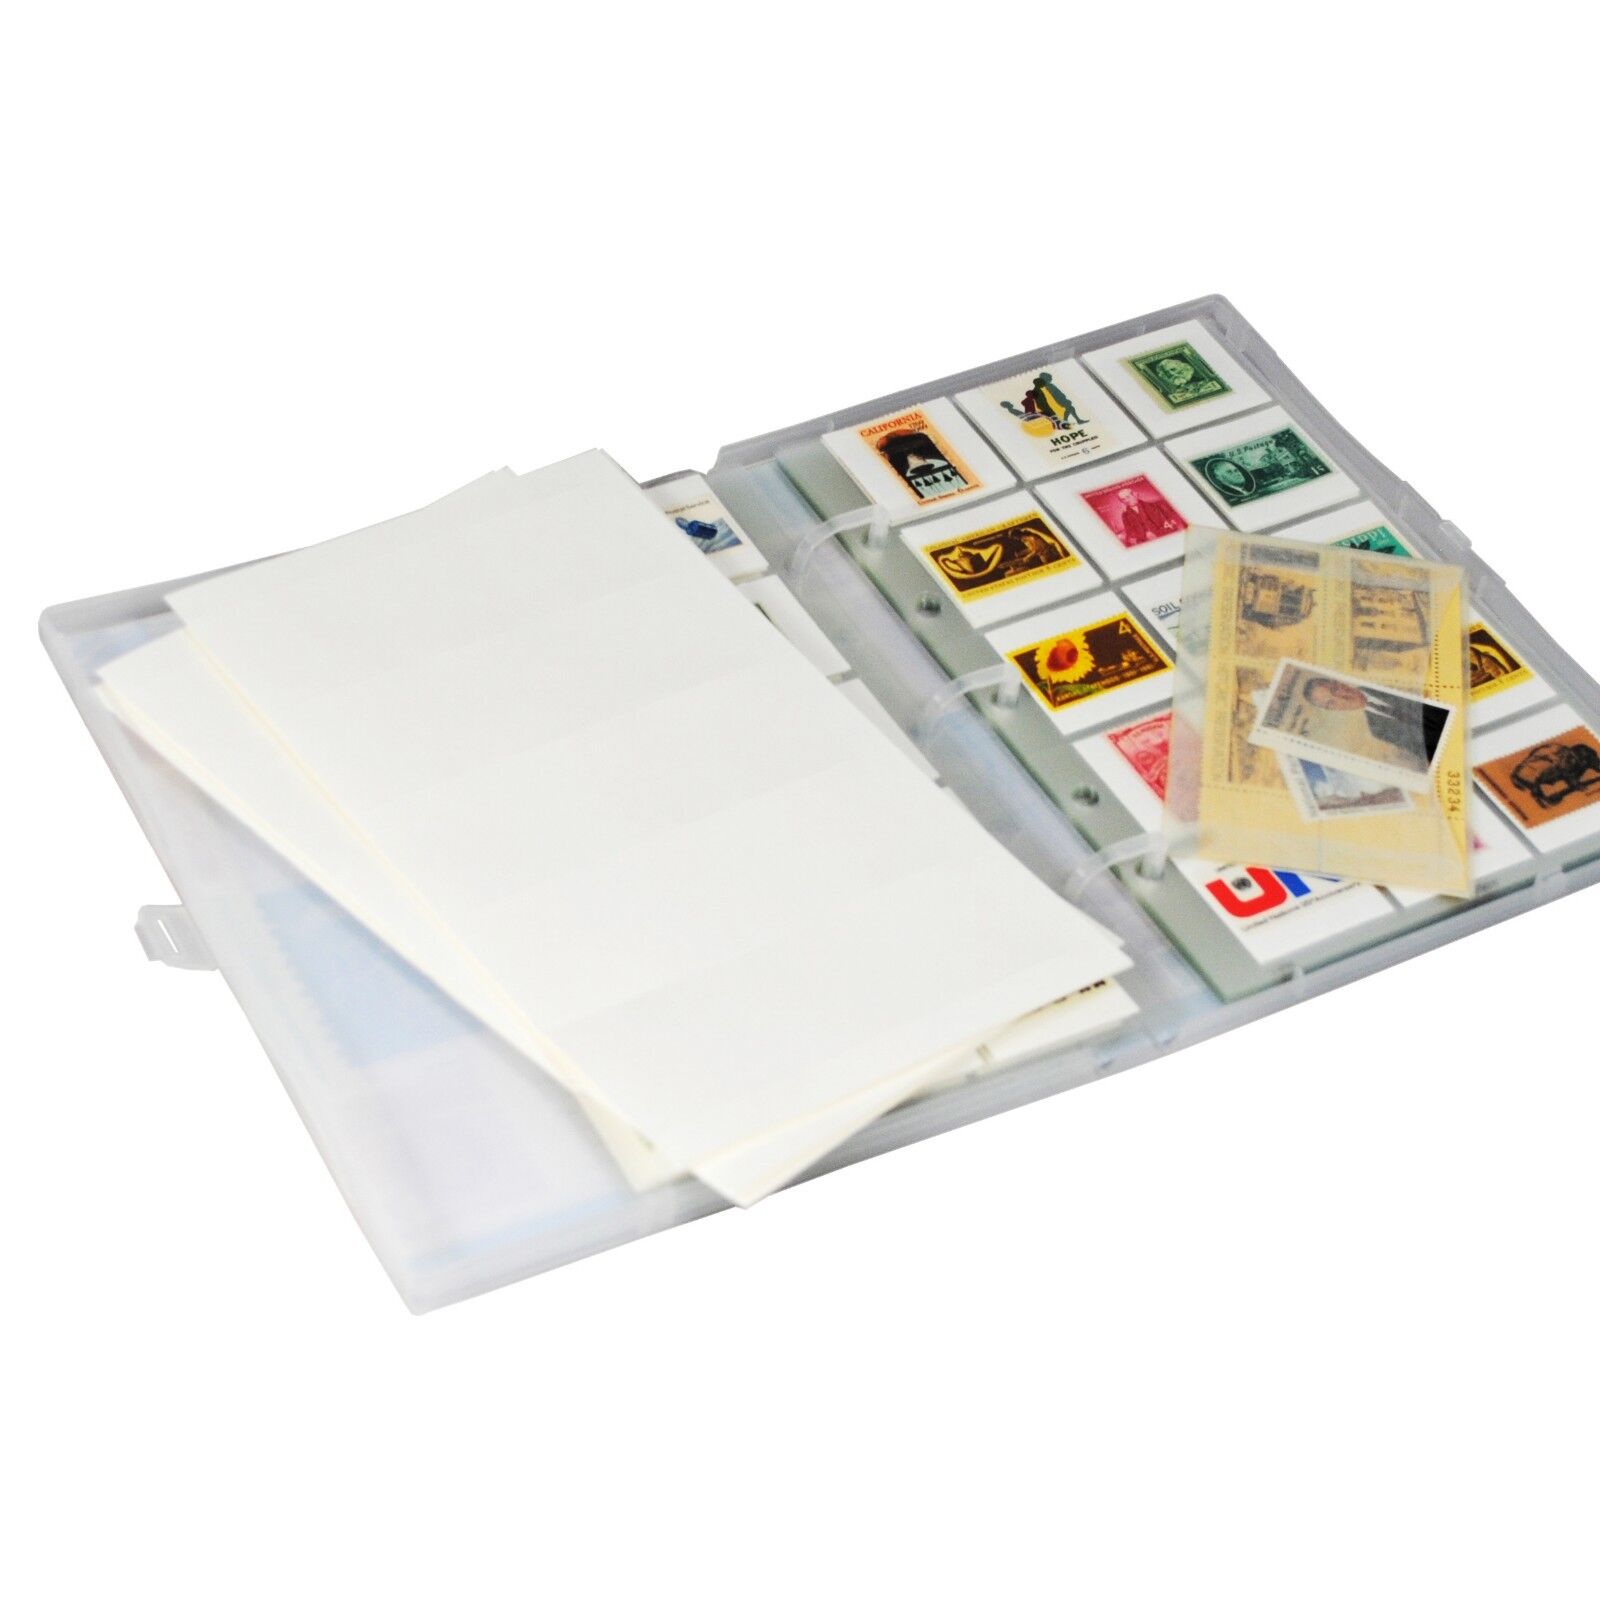 Stamp Collection Kit/Album, w/ 10 Pages, Holds 150-300 Stamps (No Stamps) UniKeep 17094 - фотография #2